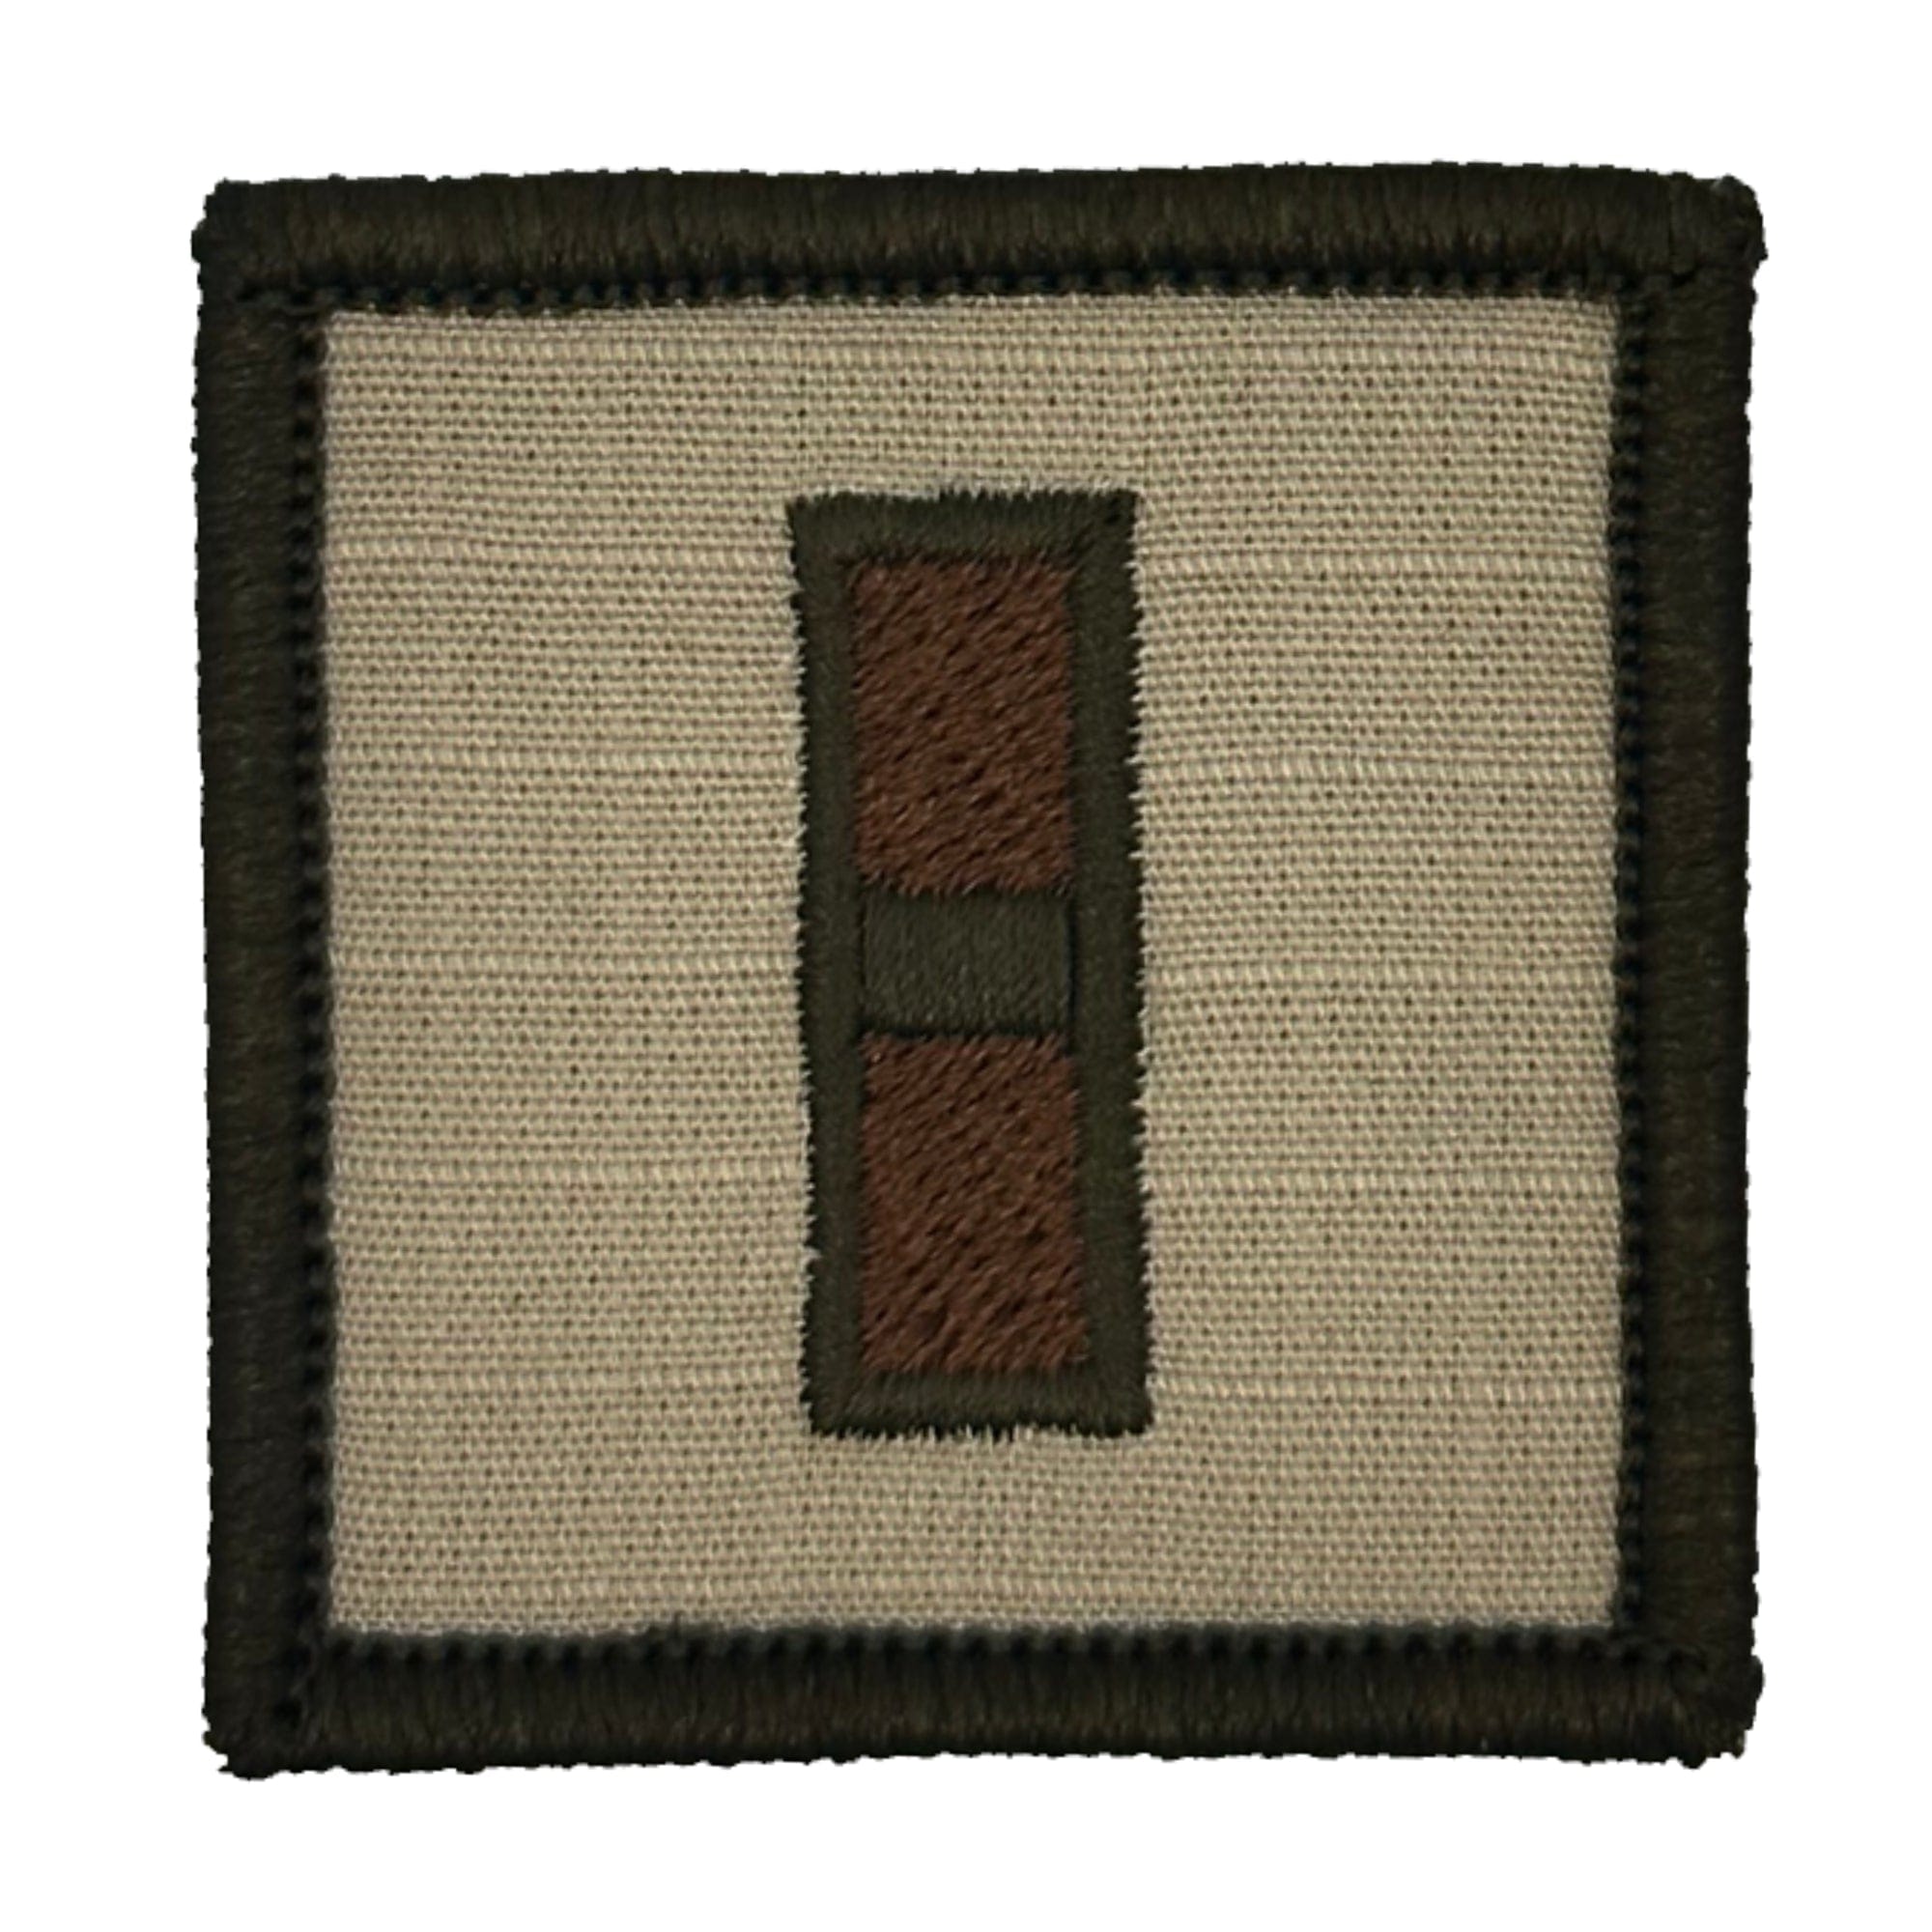 Tactical Gear Junkie Patches Desert Sand / Chief Warrant Officer 3 USMC Rank Insignia - 2x2 Patch